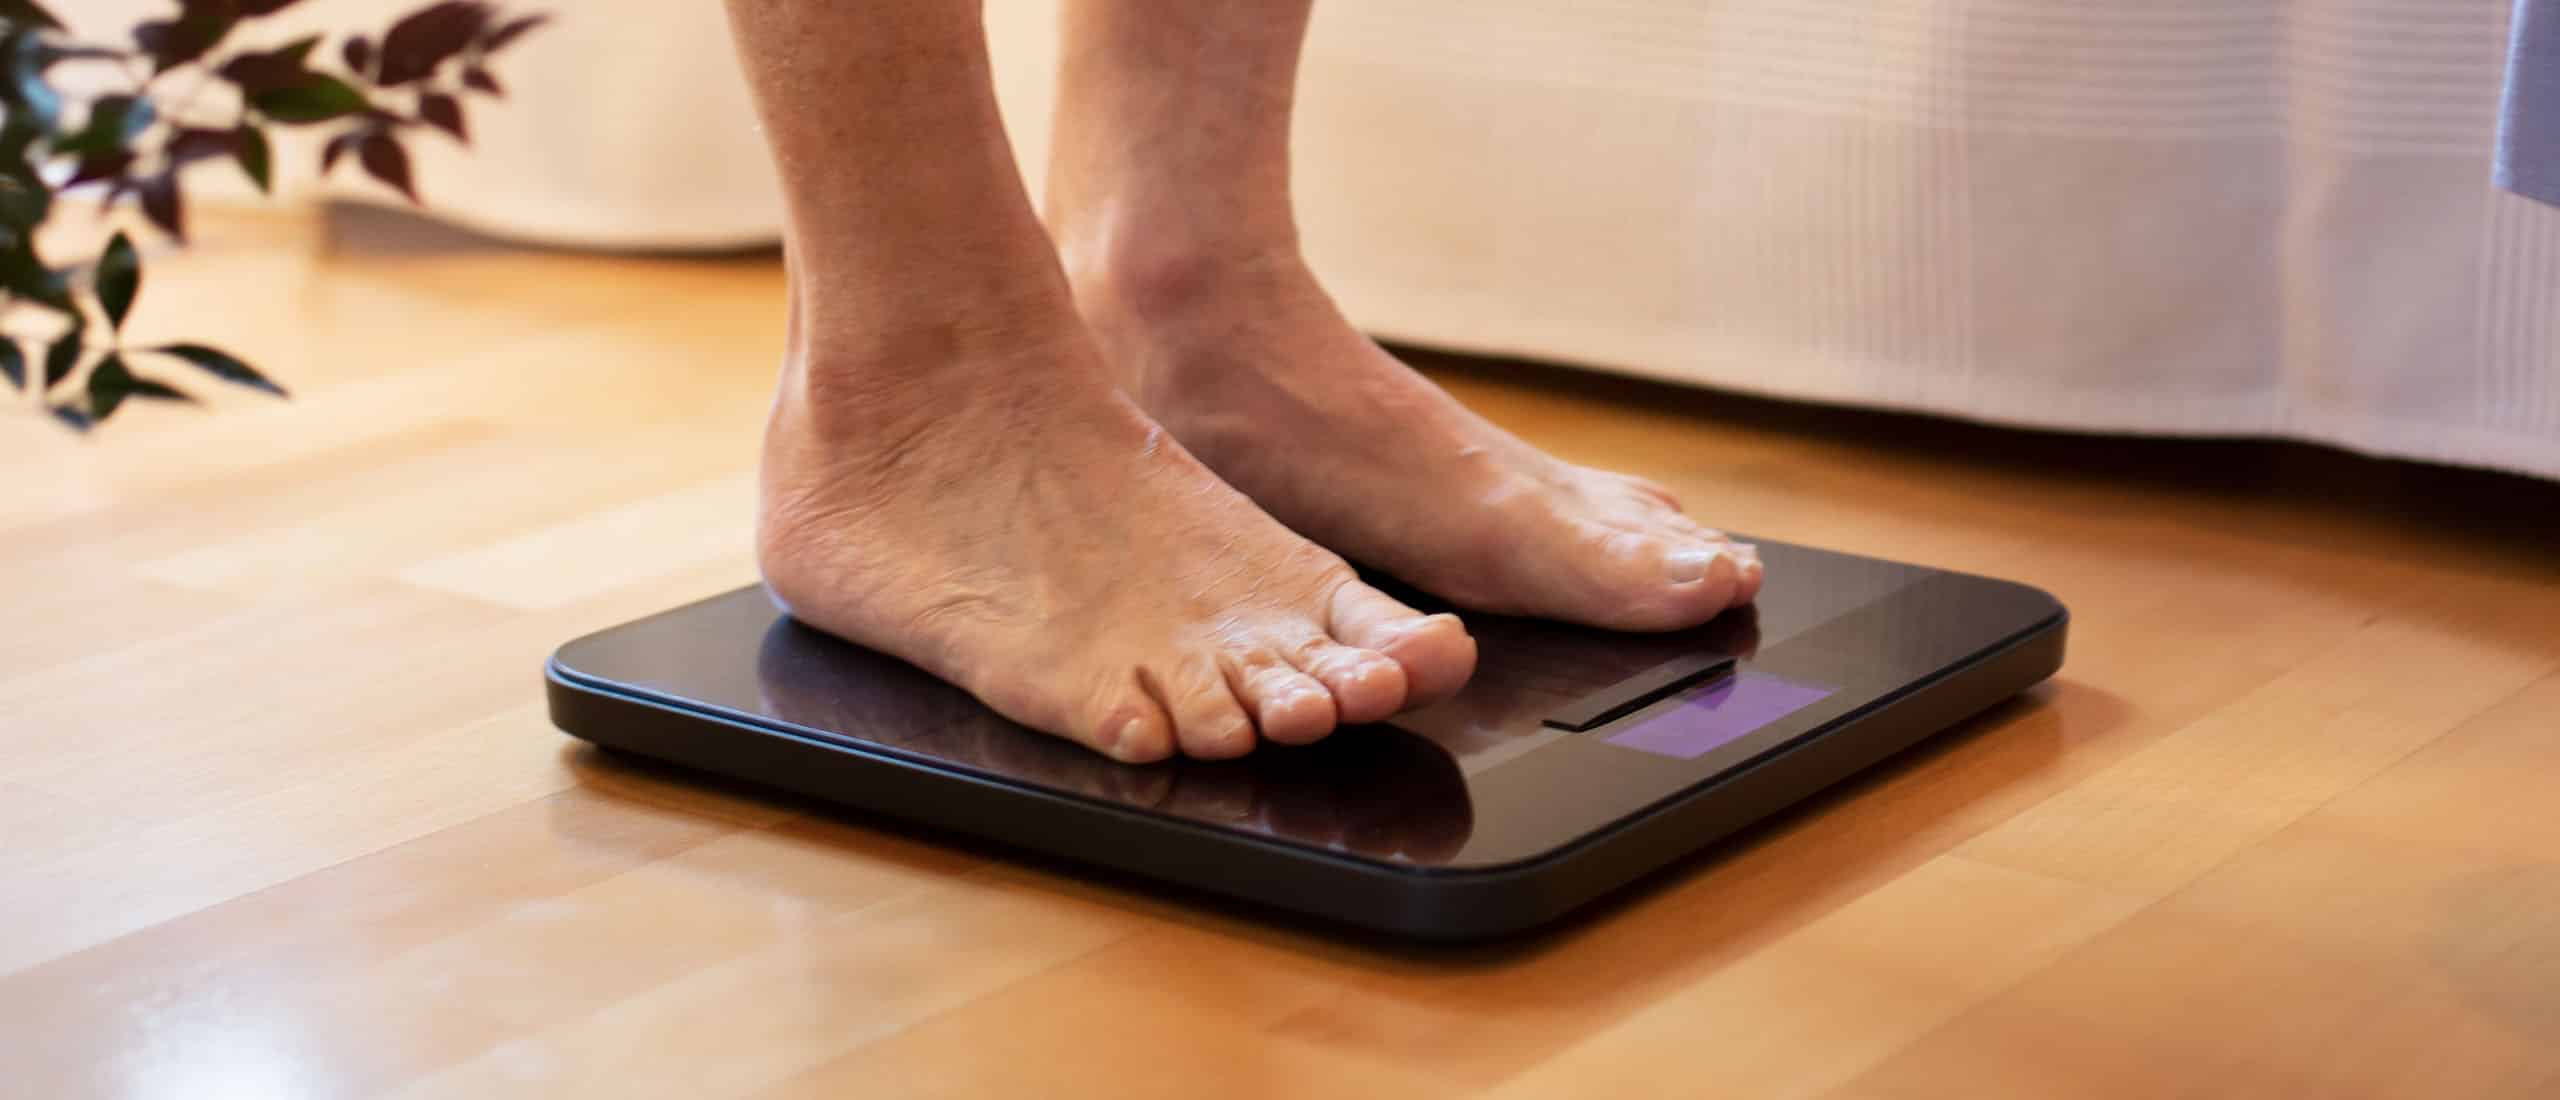 Man standing on weight scale